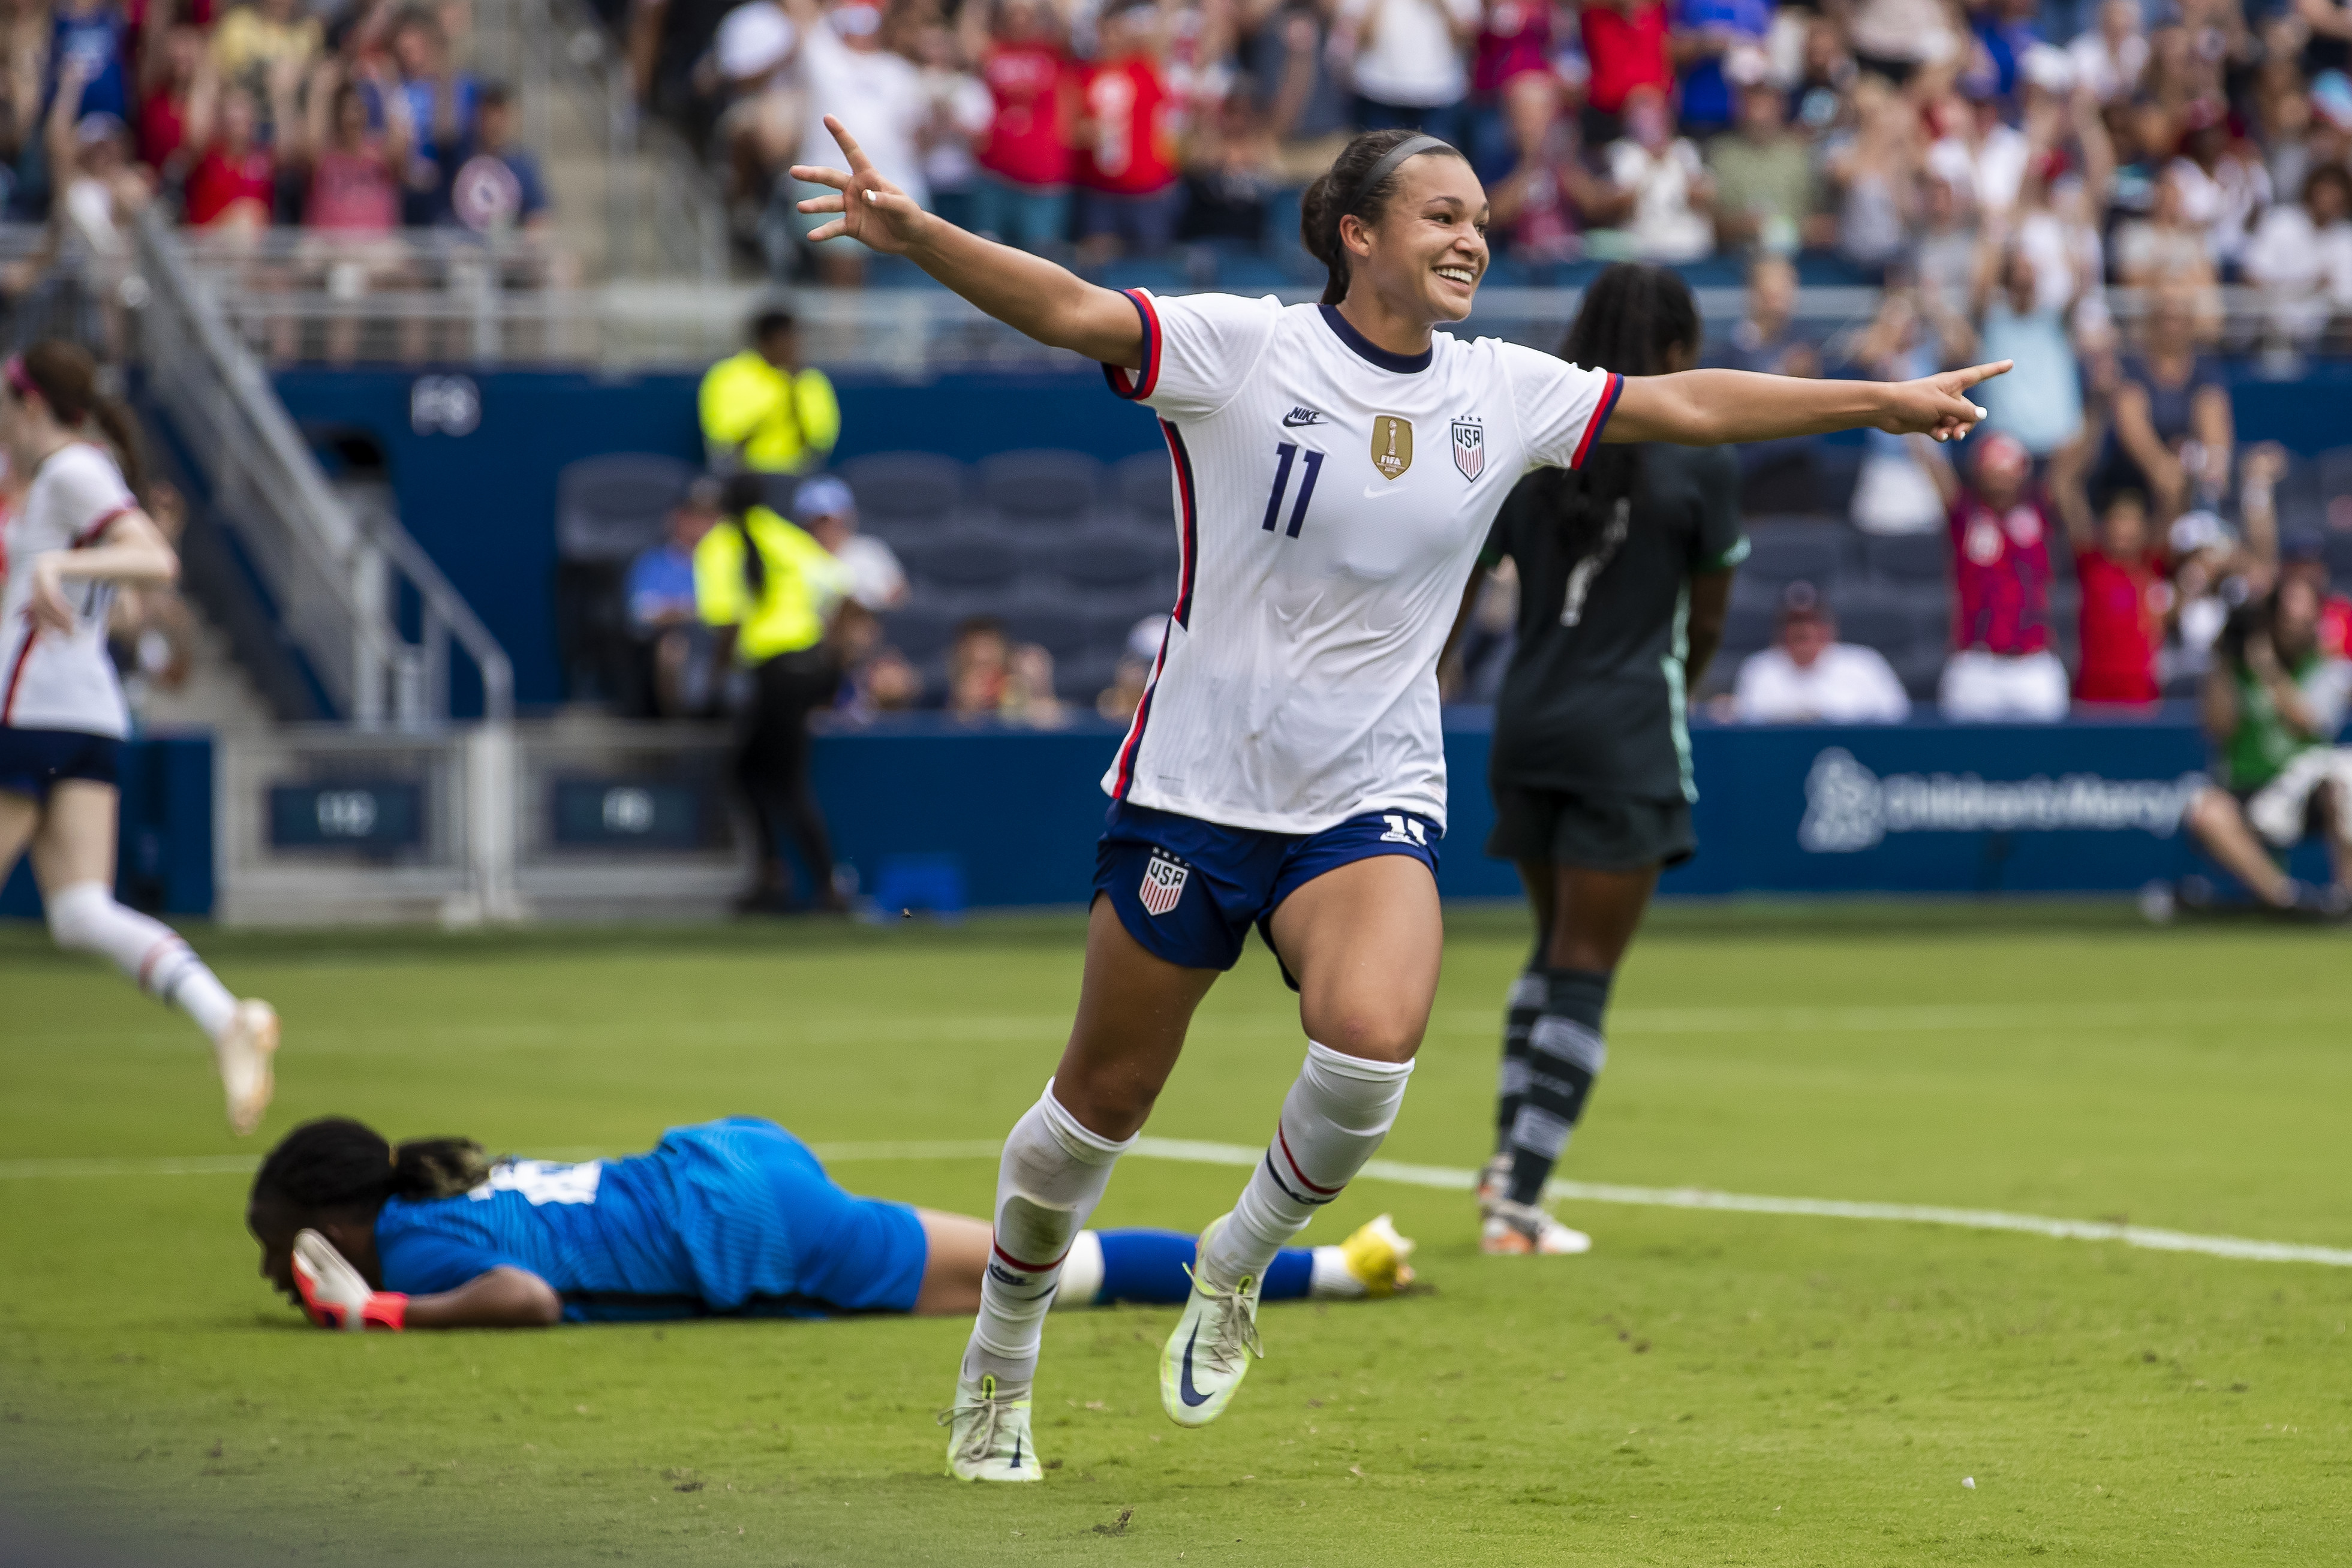 USWNT World Cup roster 2023: Meet all the American players